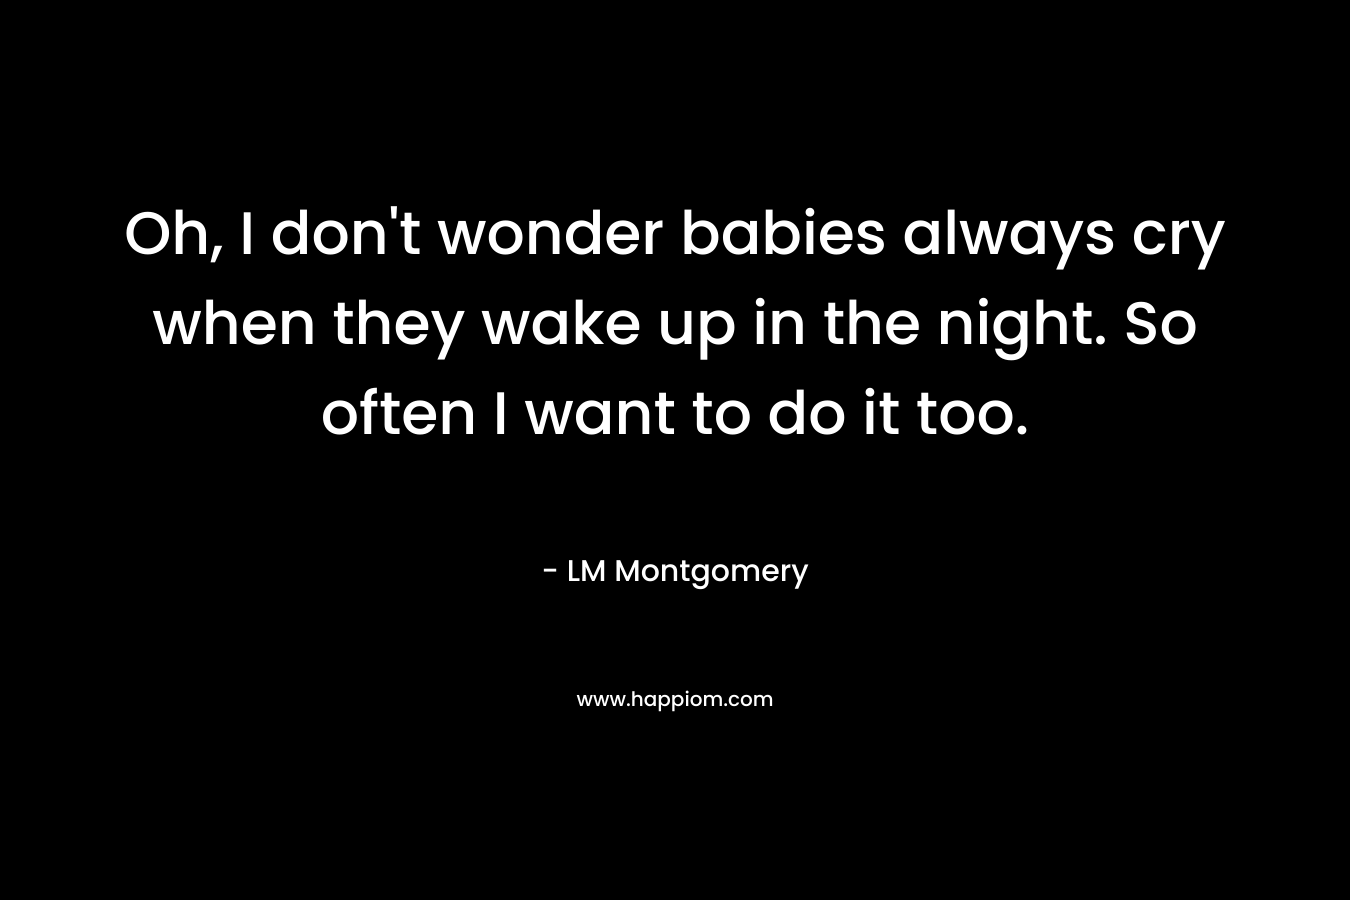 Oh, I don’t wonder babies always cry when they wake up in the night. So often I want to do it too. – LM Montgomery